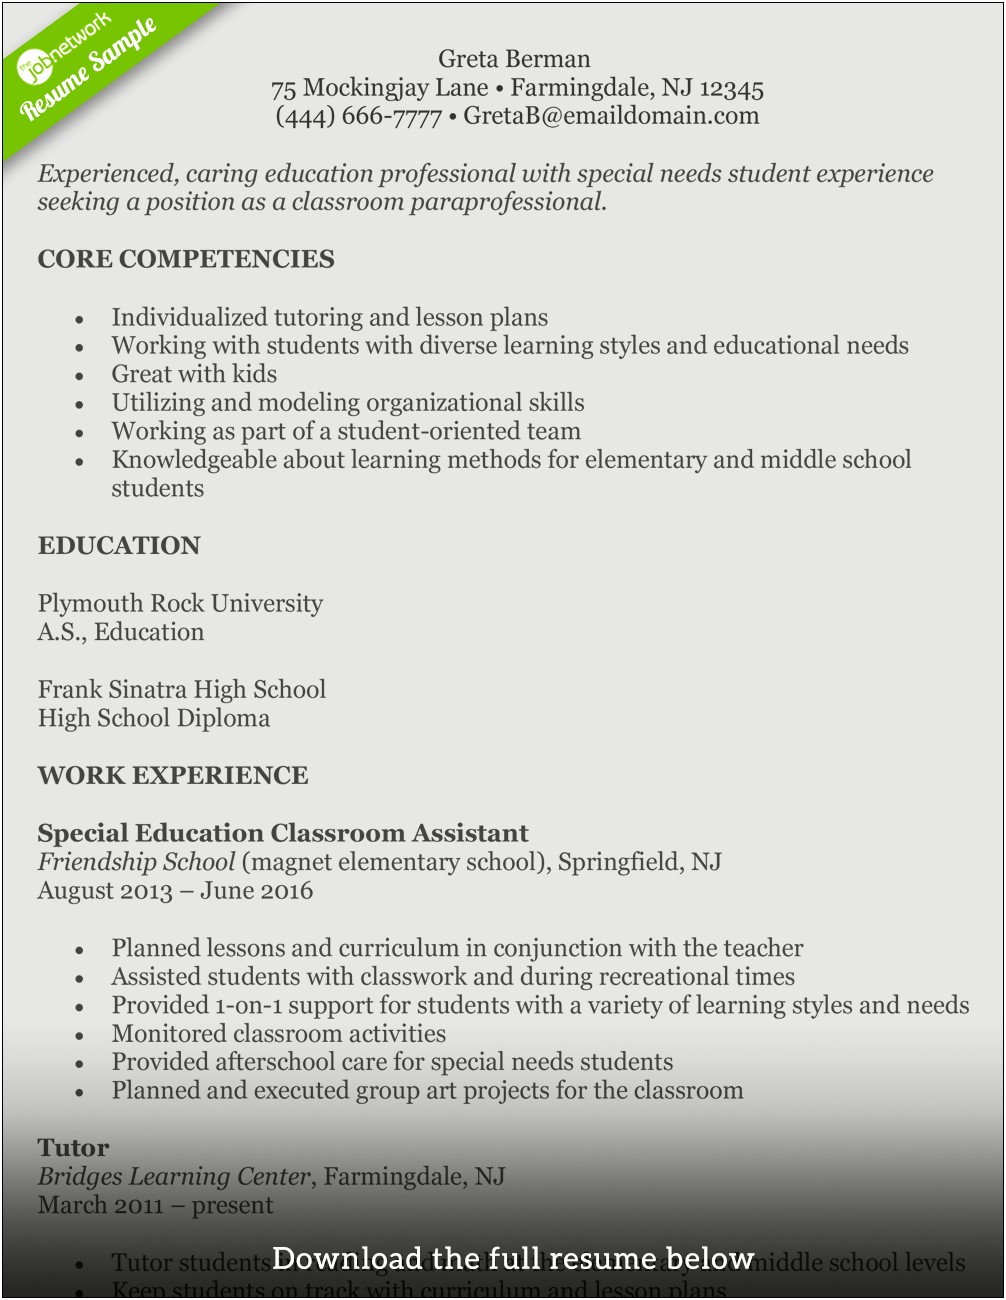 Great Resume Examples For Teachers